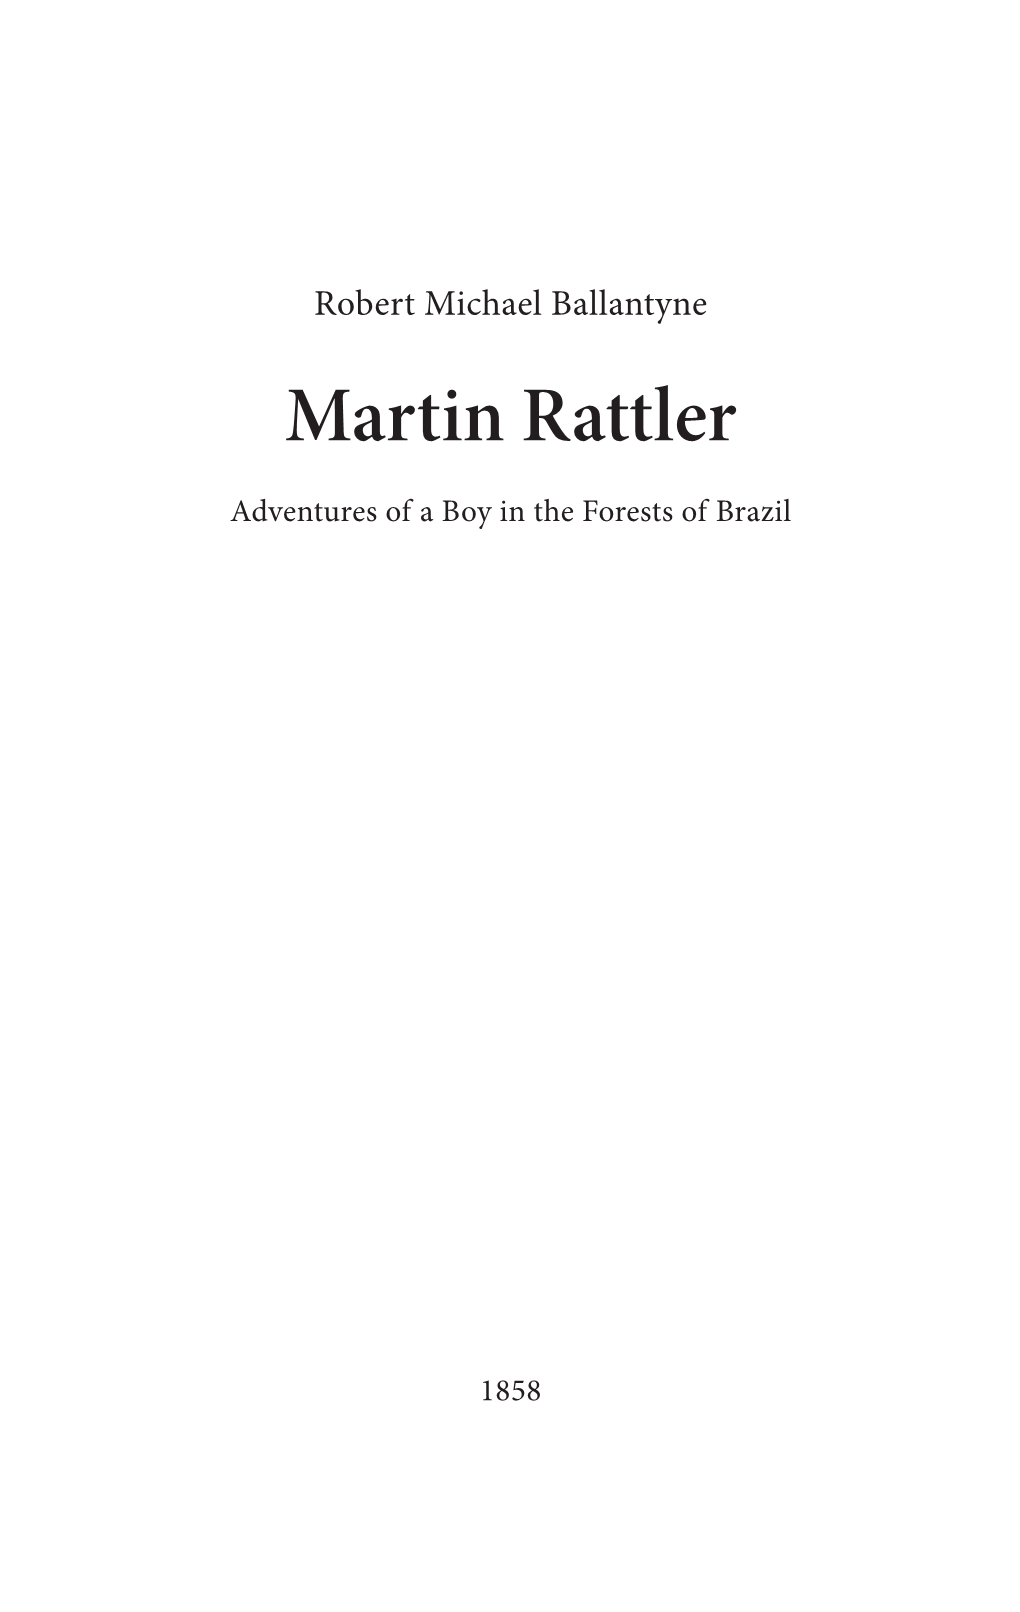 Martin Rattler. Adventures of a Boy in the Forests of Brazil